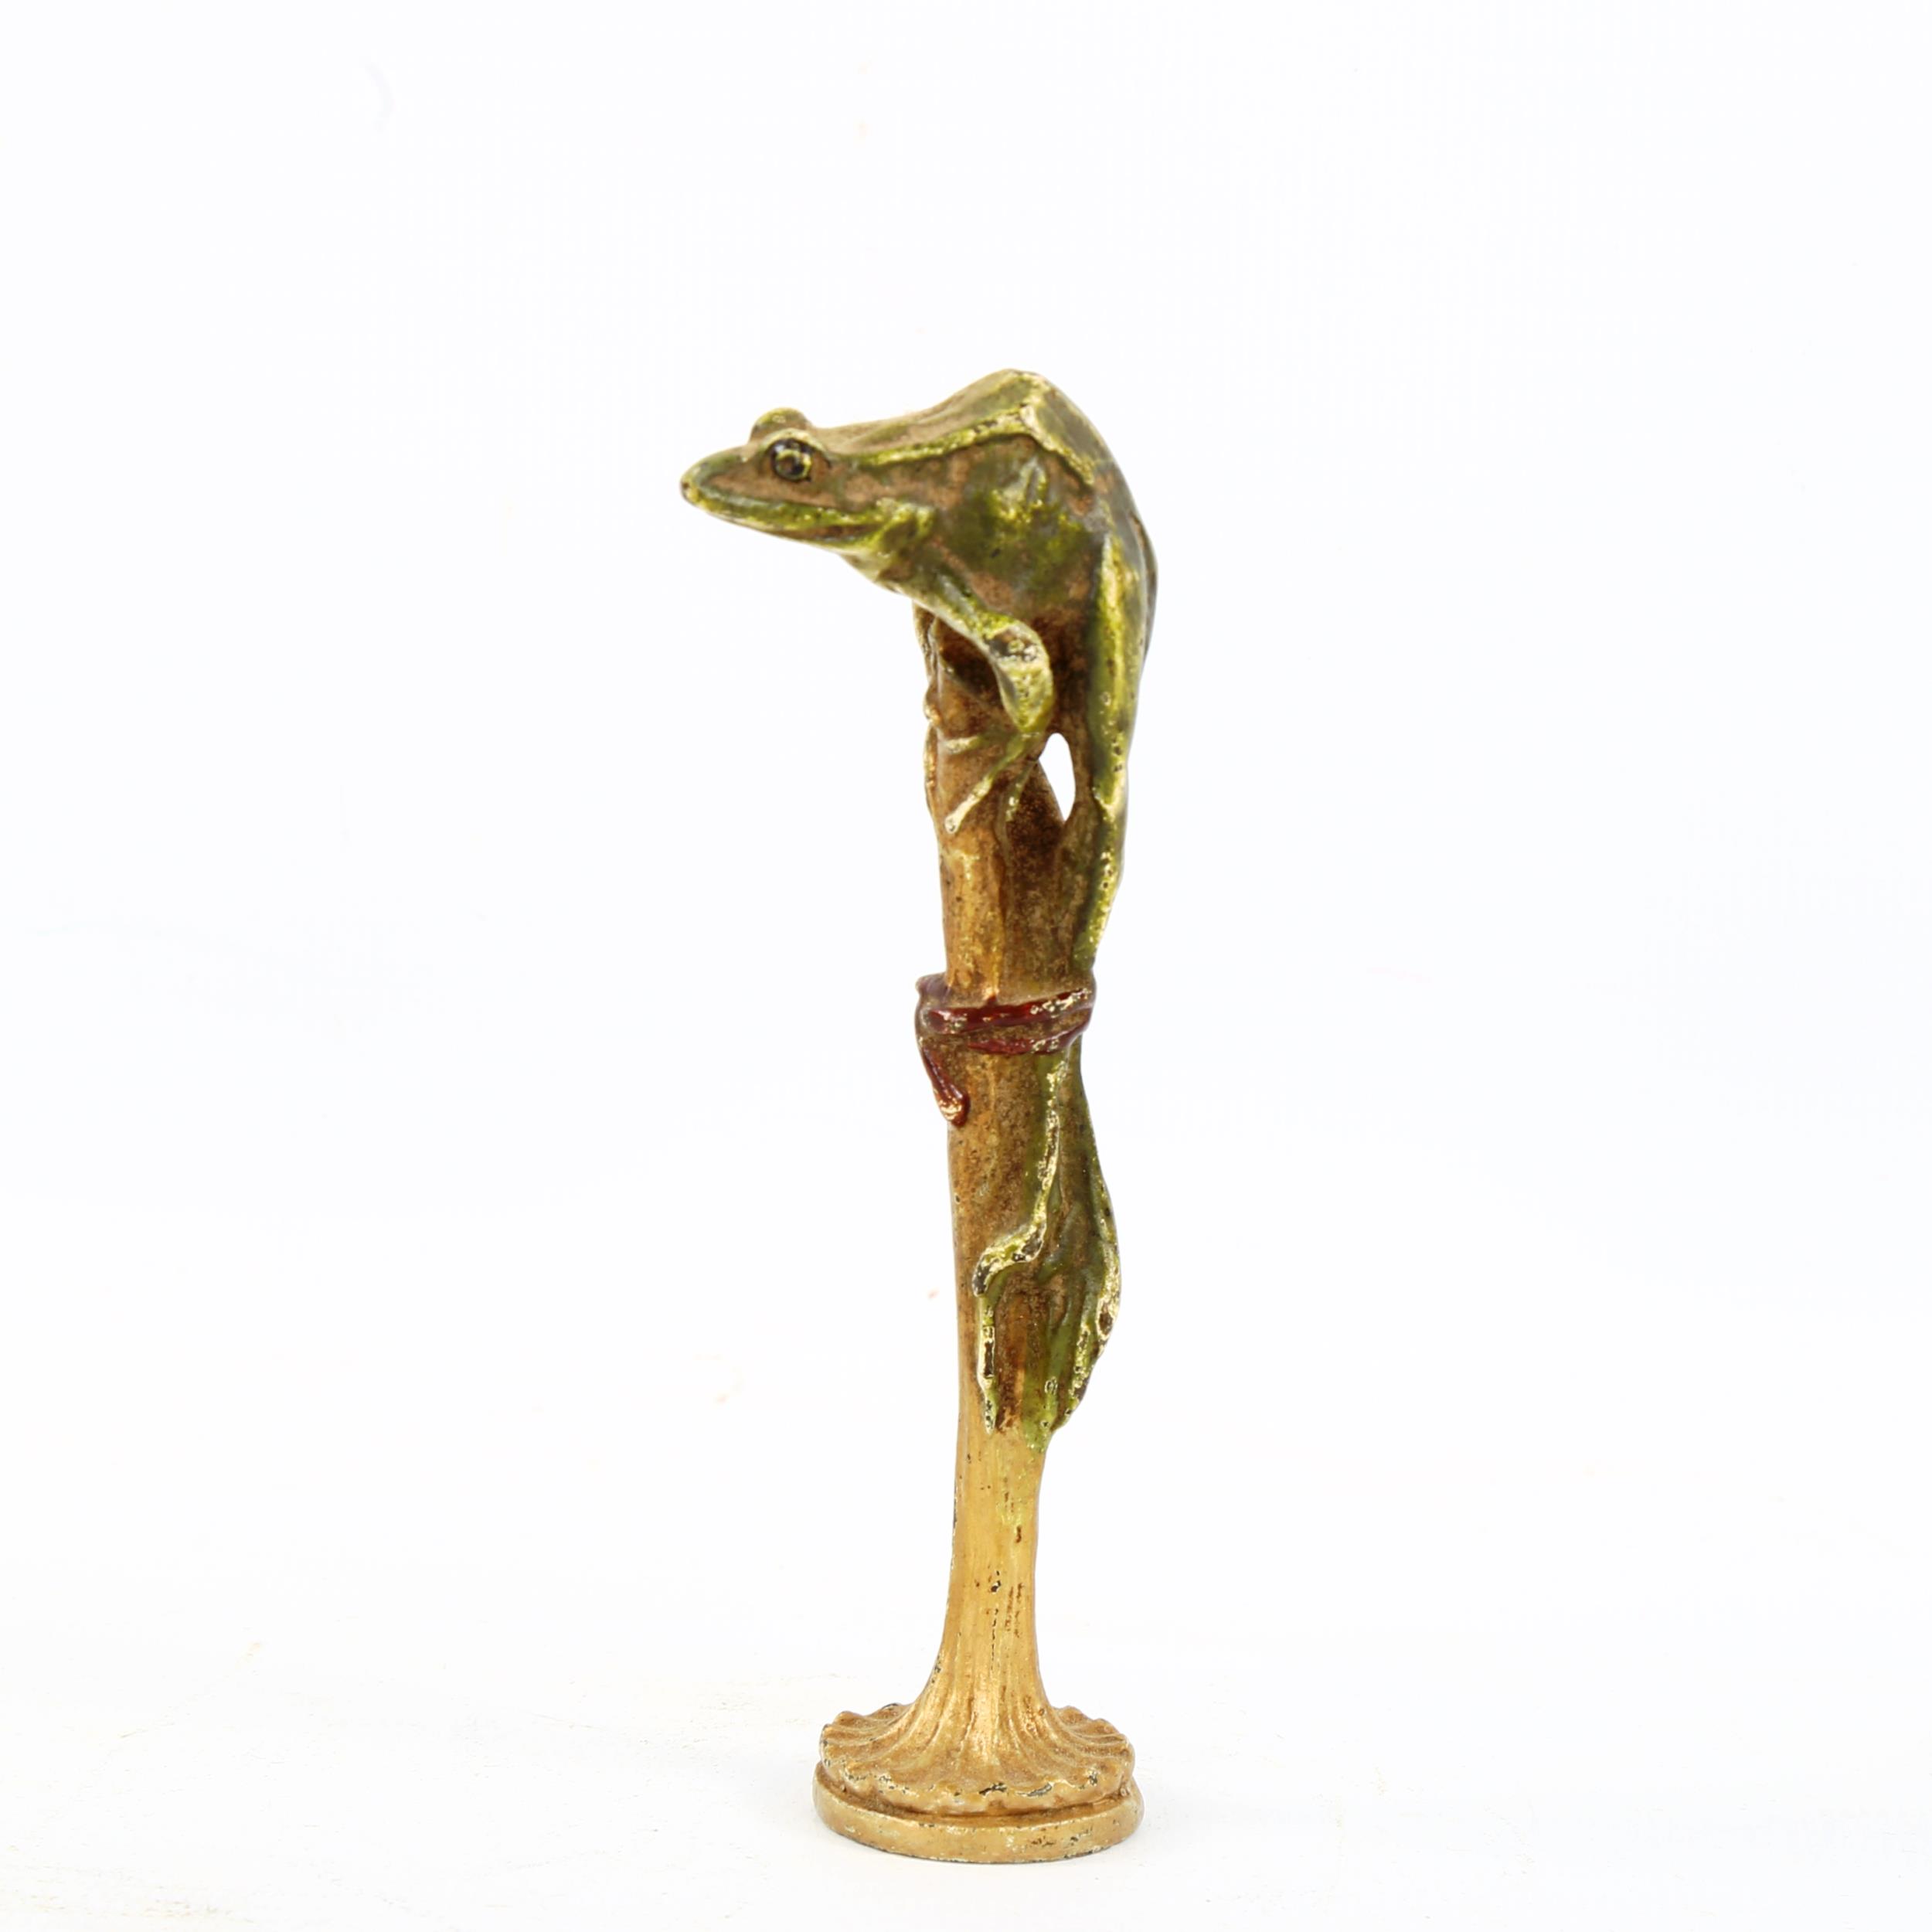 Franz Bergmann, cold painted bronze frog on a pole, height 10.5cm